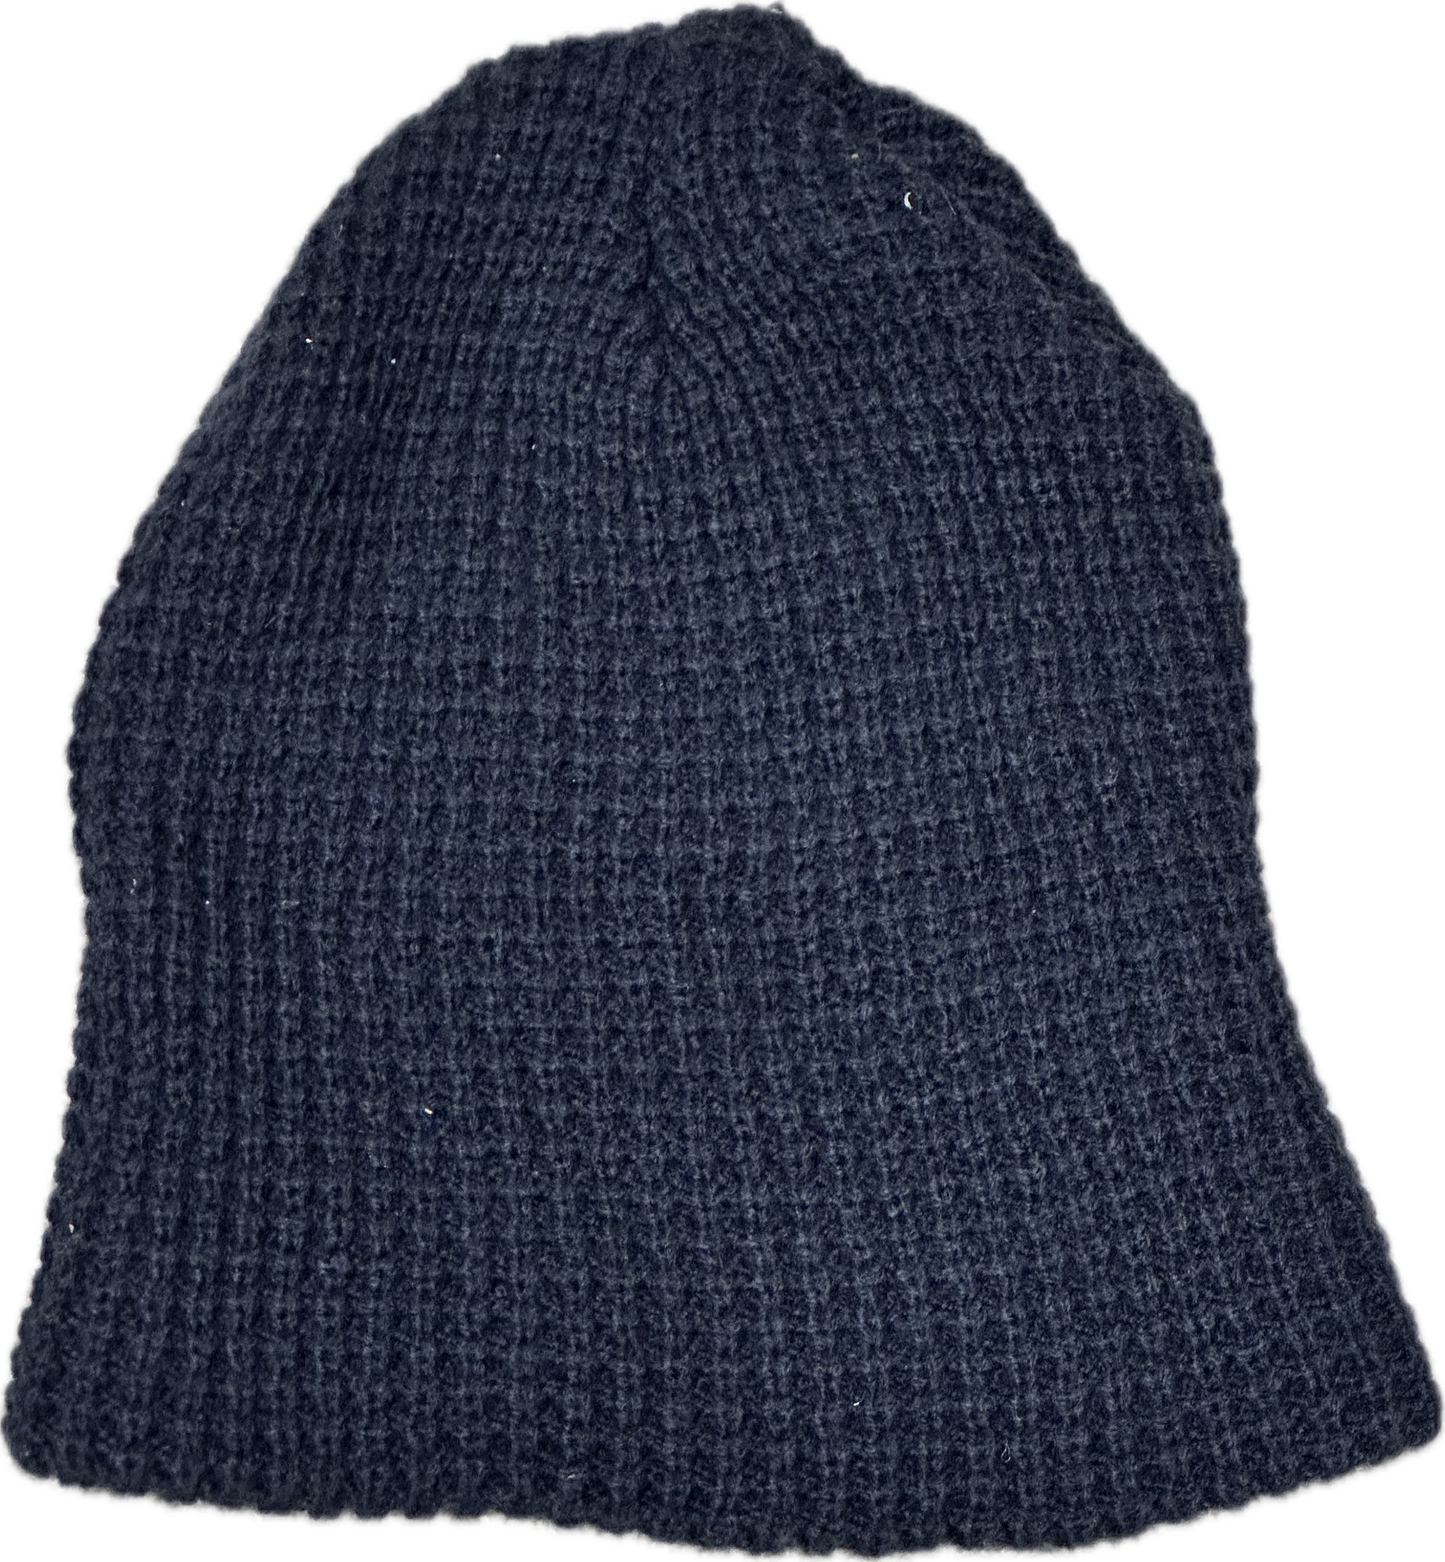 MAD MEN: Peggy's 1960s Winter Knit Hat